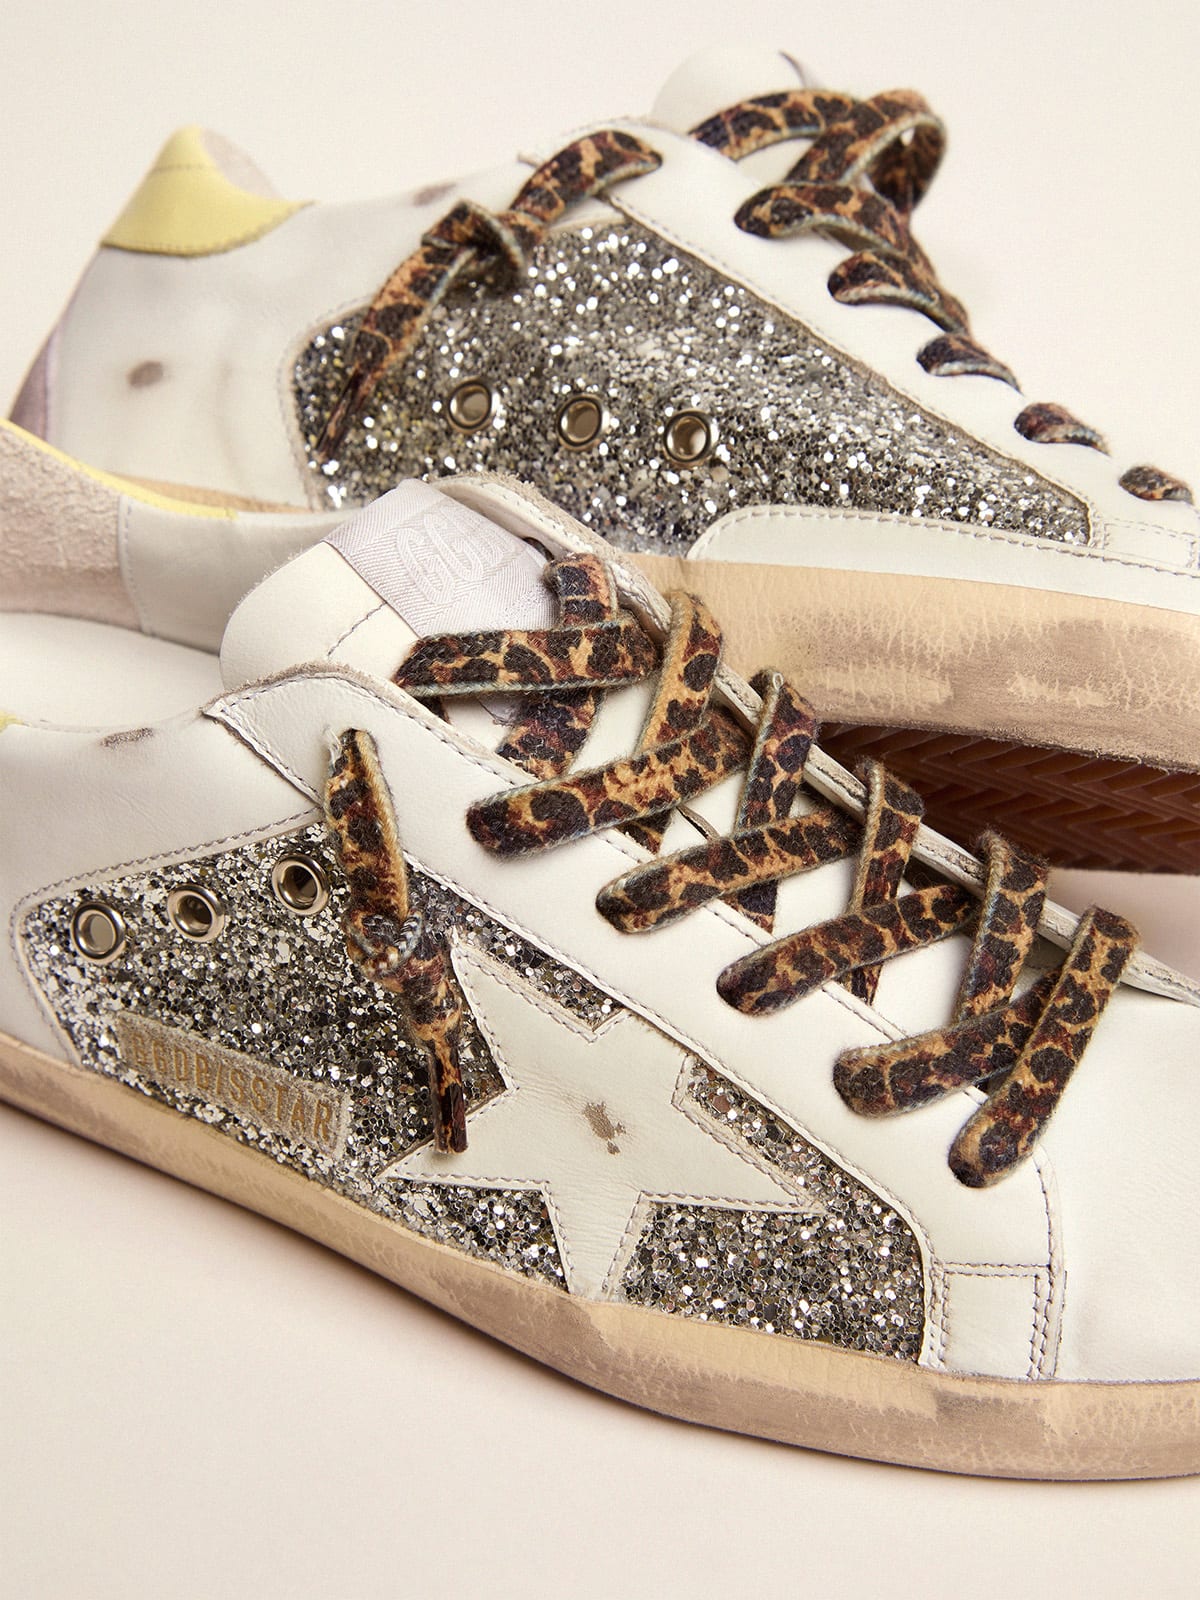 LTD Super-Star Sneakers in leather and glitter with colorful heel tab |  Golden Goose